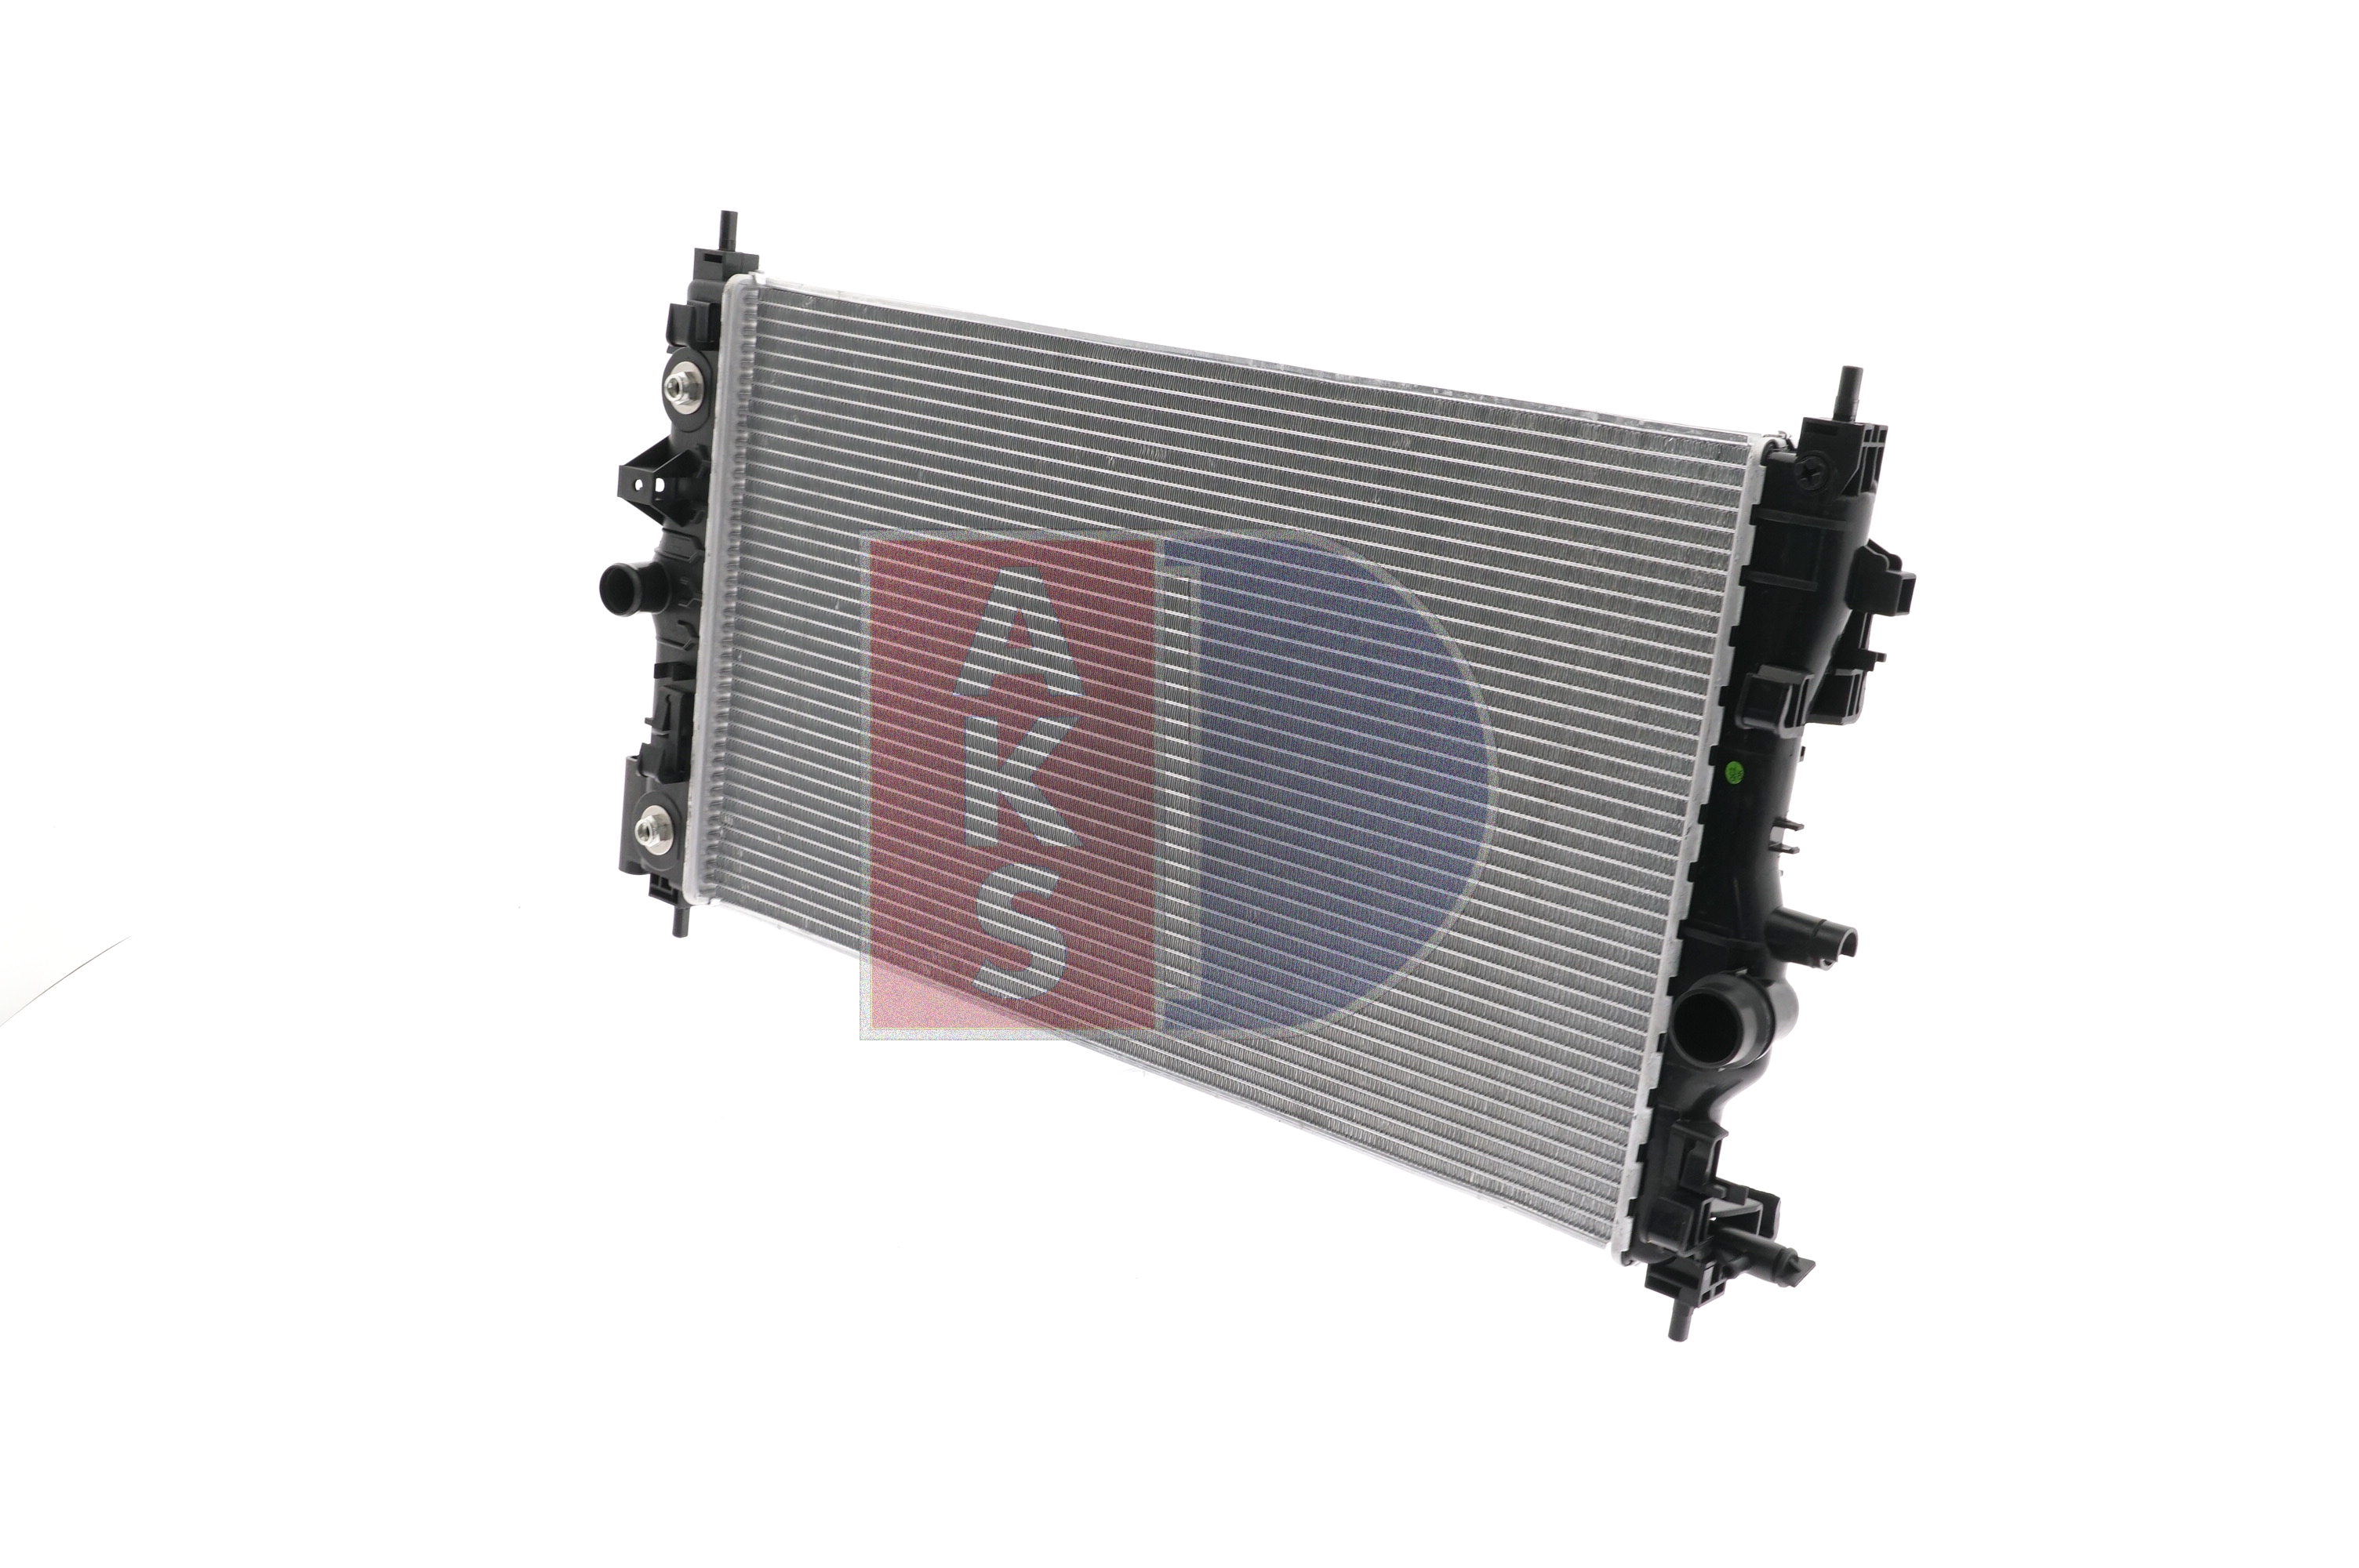 AKS DASIS 150098N Engine radiator Aluminium, for vehicles with/without air conditioning, 680 x 400 x 27 mm, Automatic Transmission, Brazed cooling fins